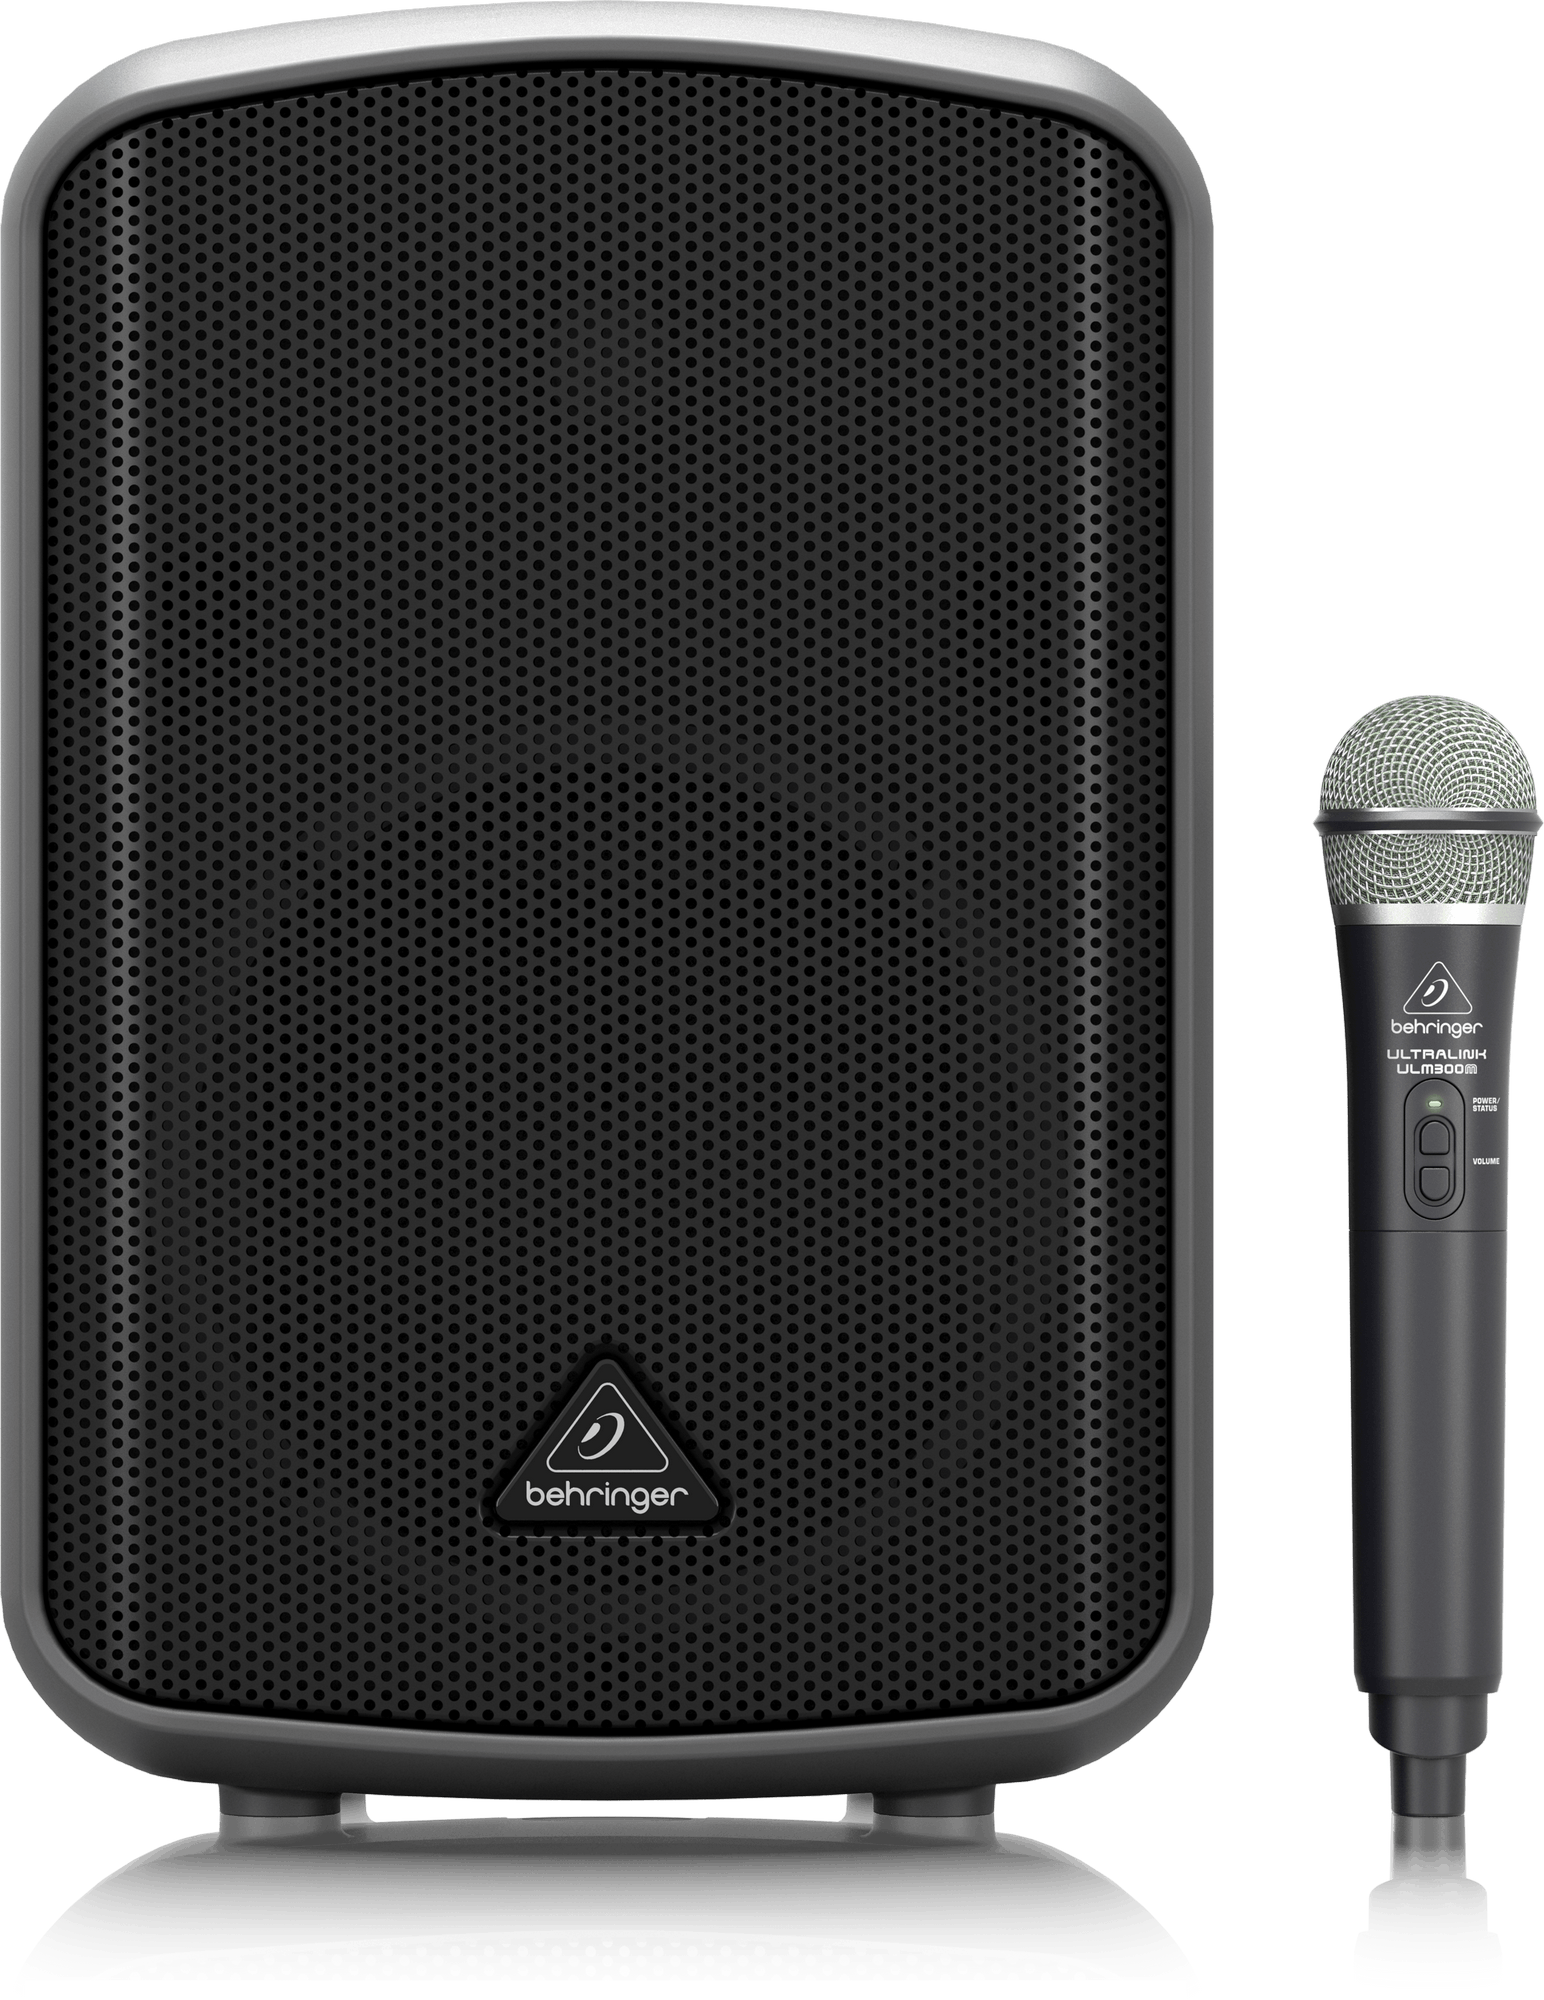 Behringer Mpa200bt All In One Portable 200 Watt Speaker With Wireless Microphone Andertons